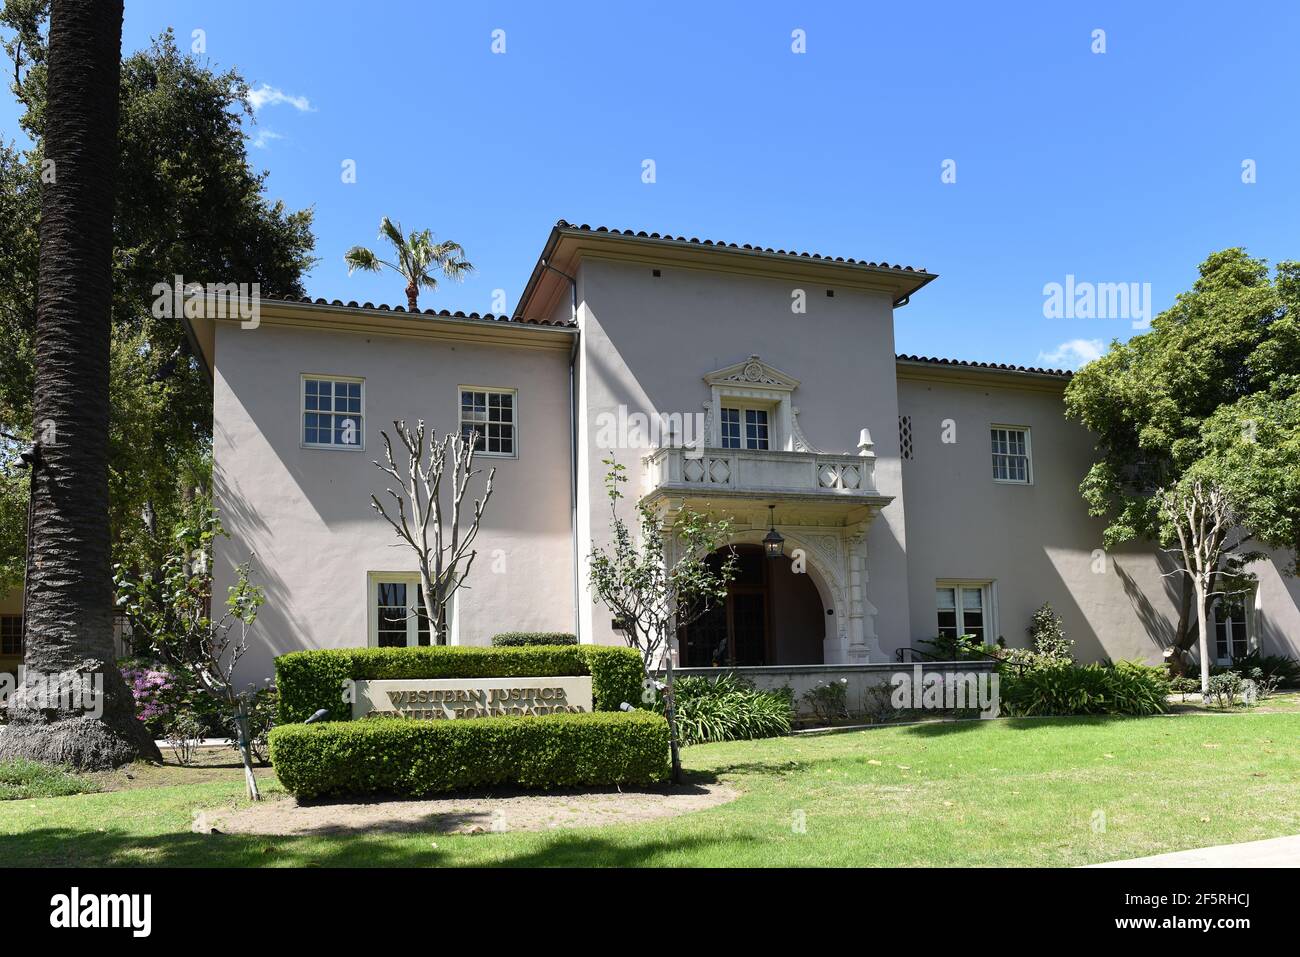 PASADENA, CALIFORNIA - 26 MAR 2021: Western Justice Center Foundation. Their mission is to increase the opportunity for peaceful conflict resolution a Stock Photo